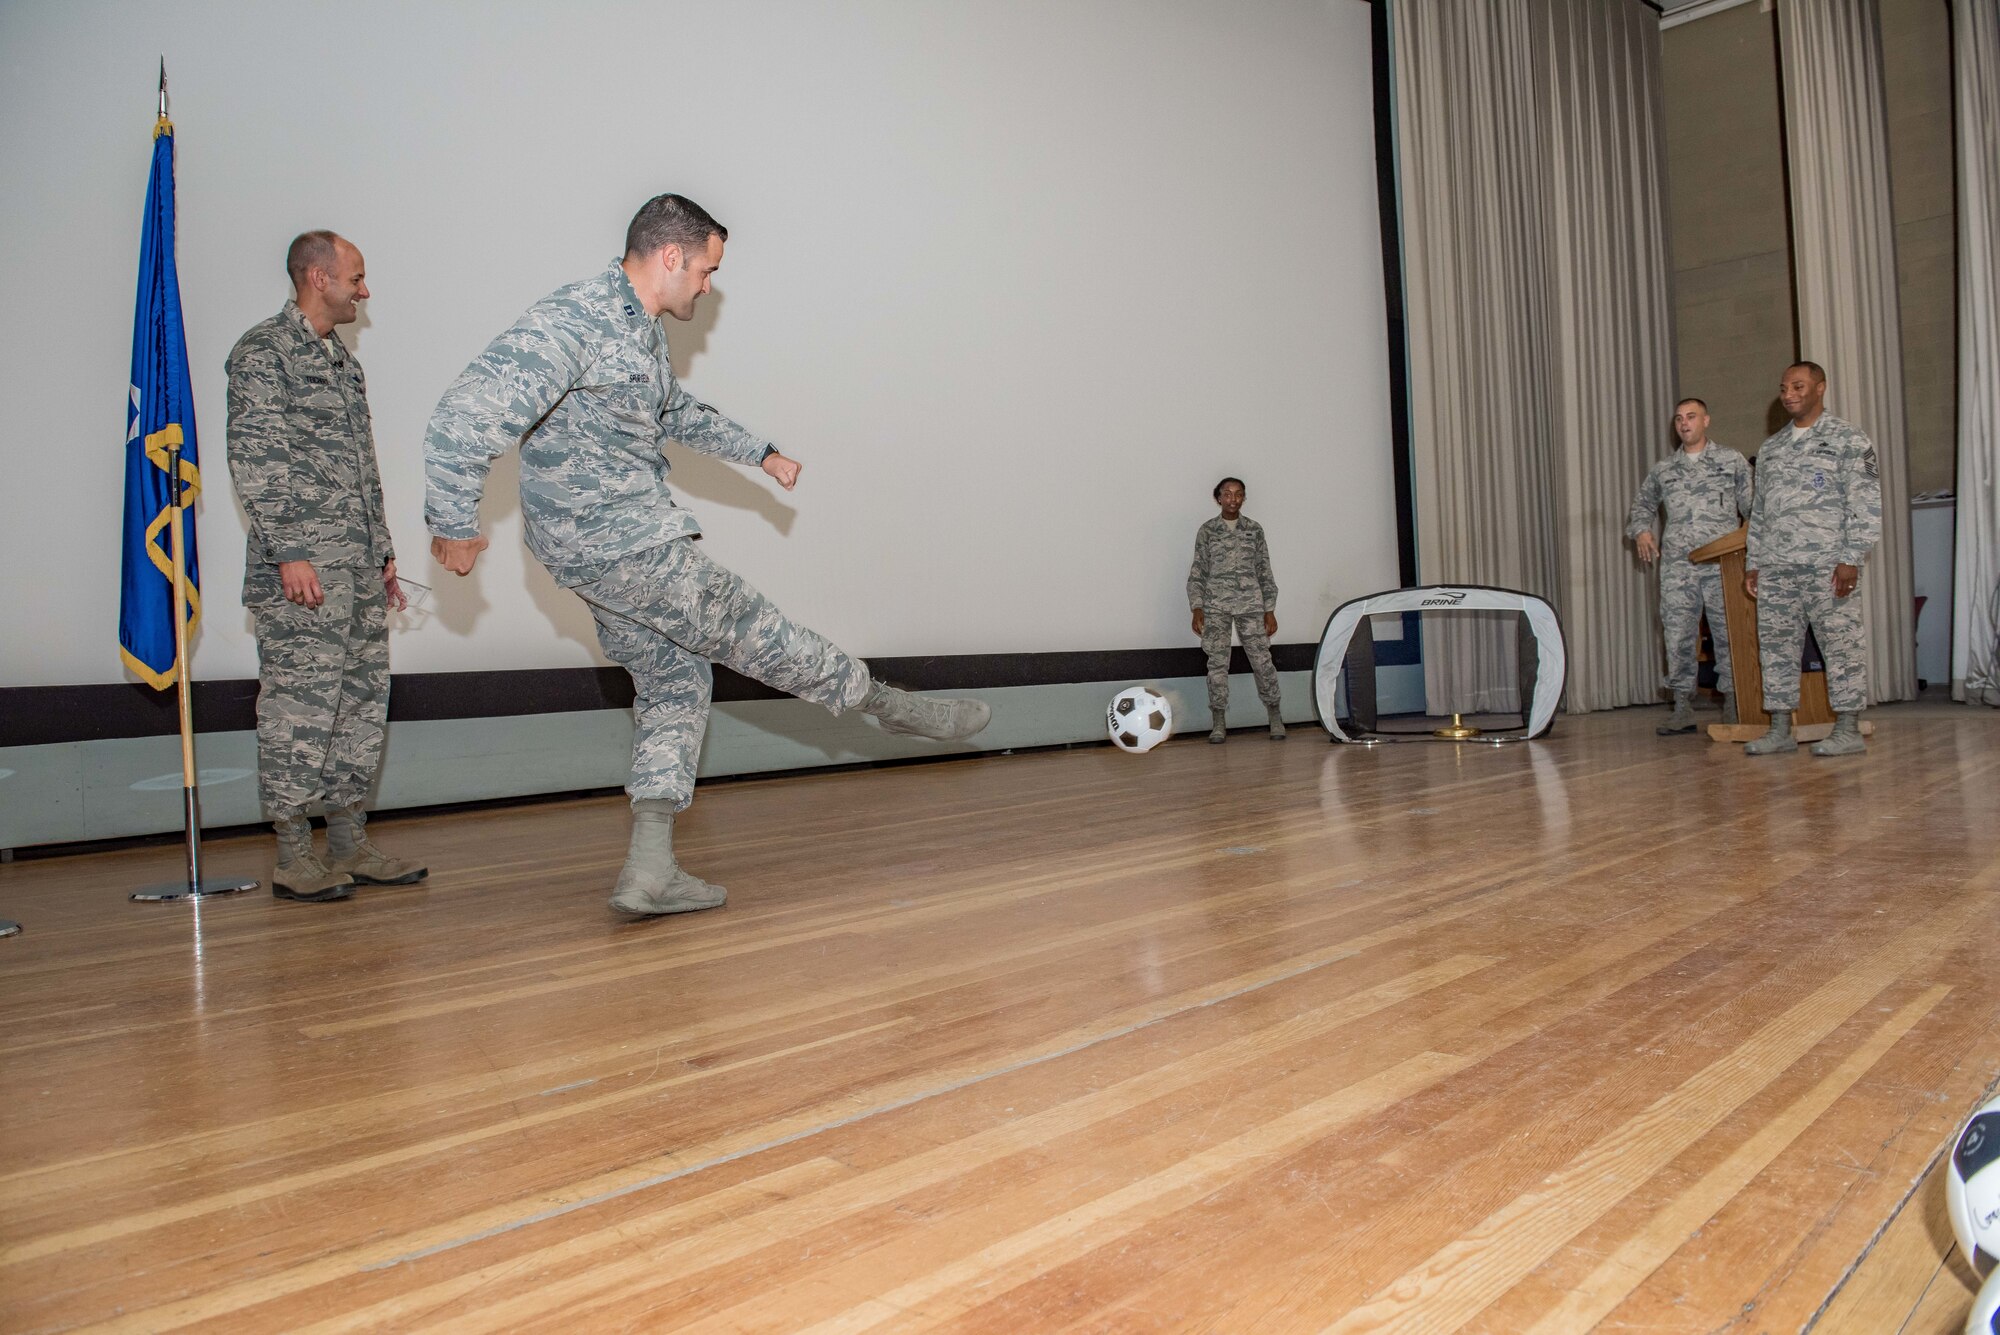 Capt. Matthew Spurgeon kicks a soccer ball into a portable goal during a 412th Test Wing commander's call and second quarter awards ceremony held in the base theater Aug. 23. (U.S. Air Force photo by Matt Williams)